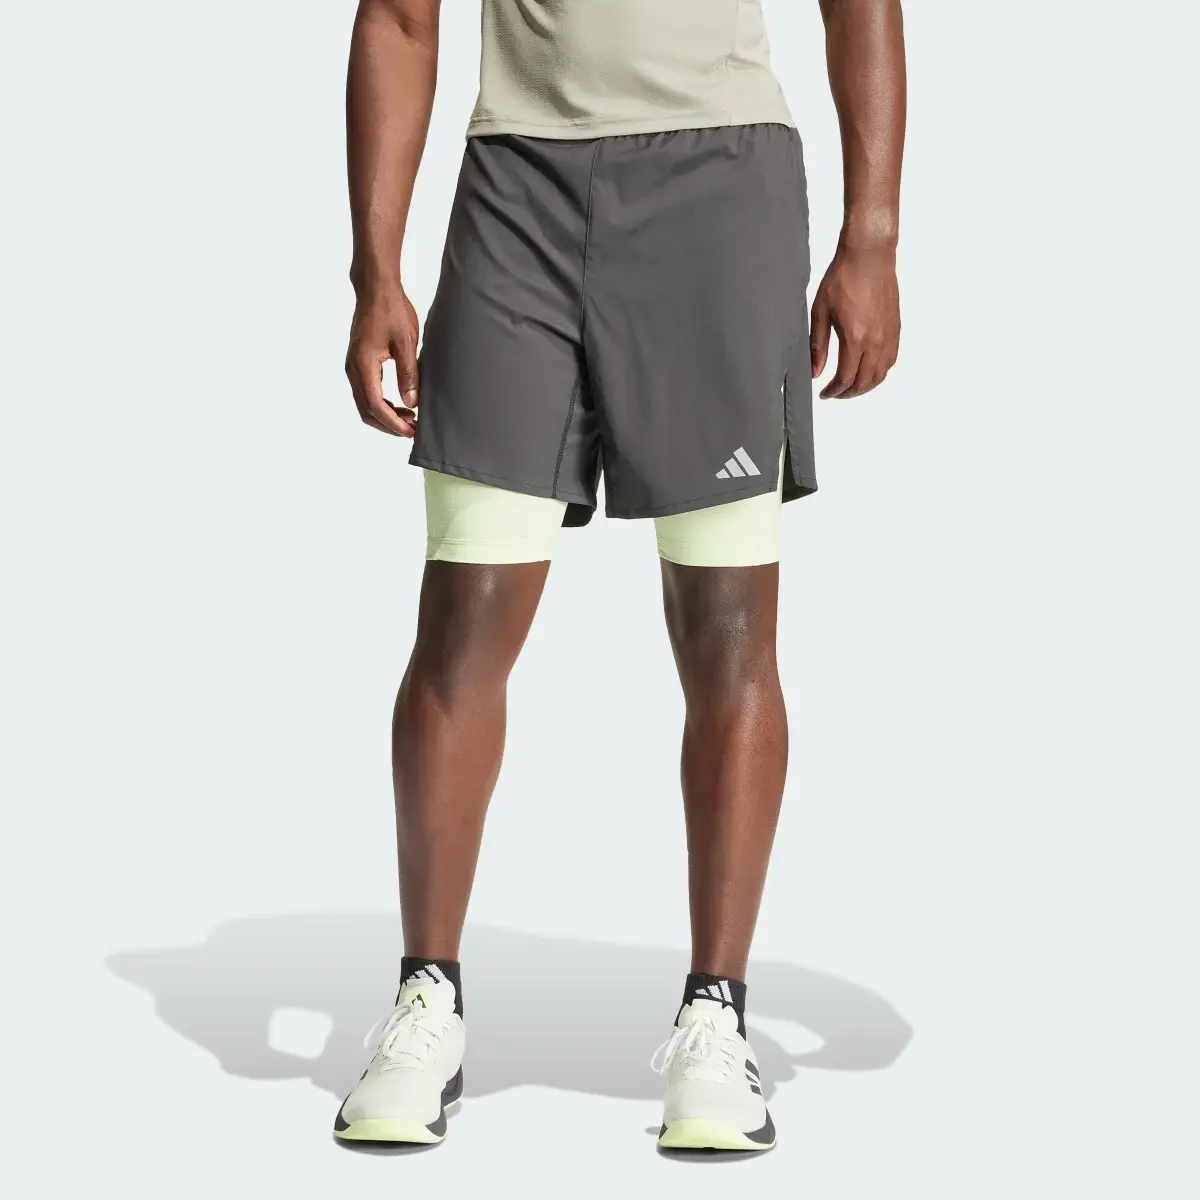 Adidas Short HIIT Workout HEAT.RDY 2-in-1. 1